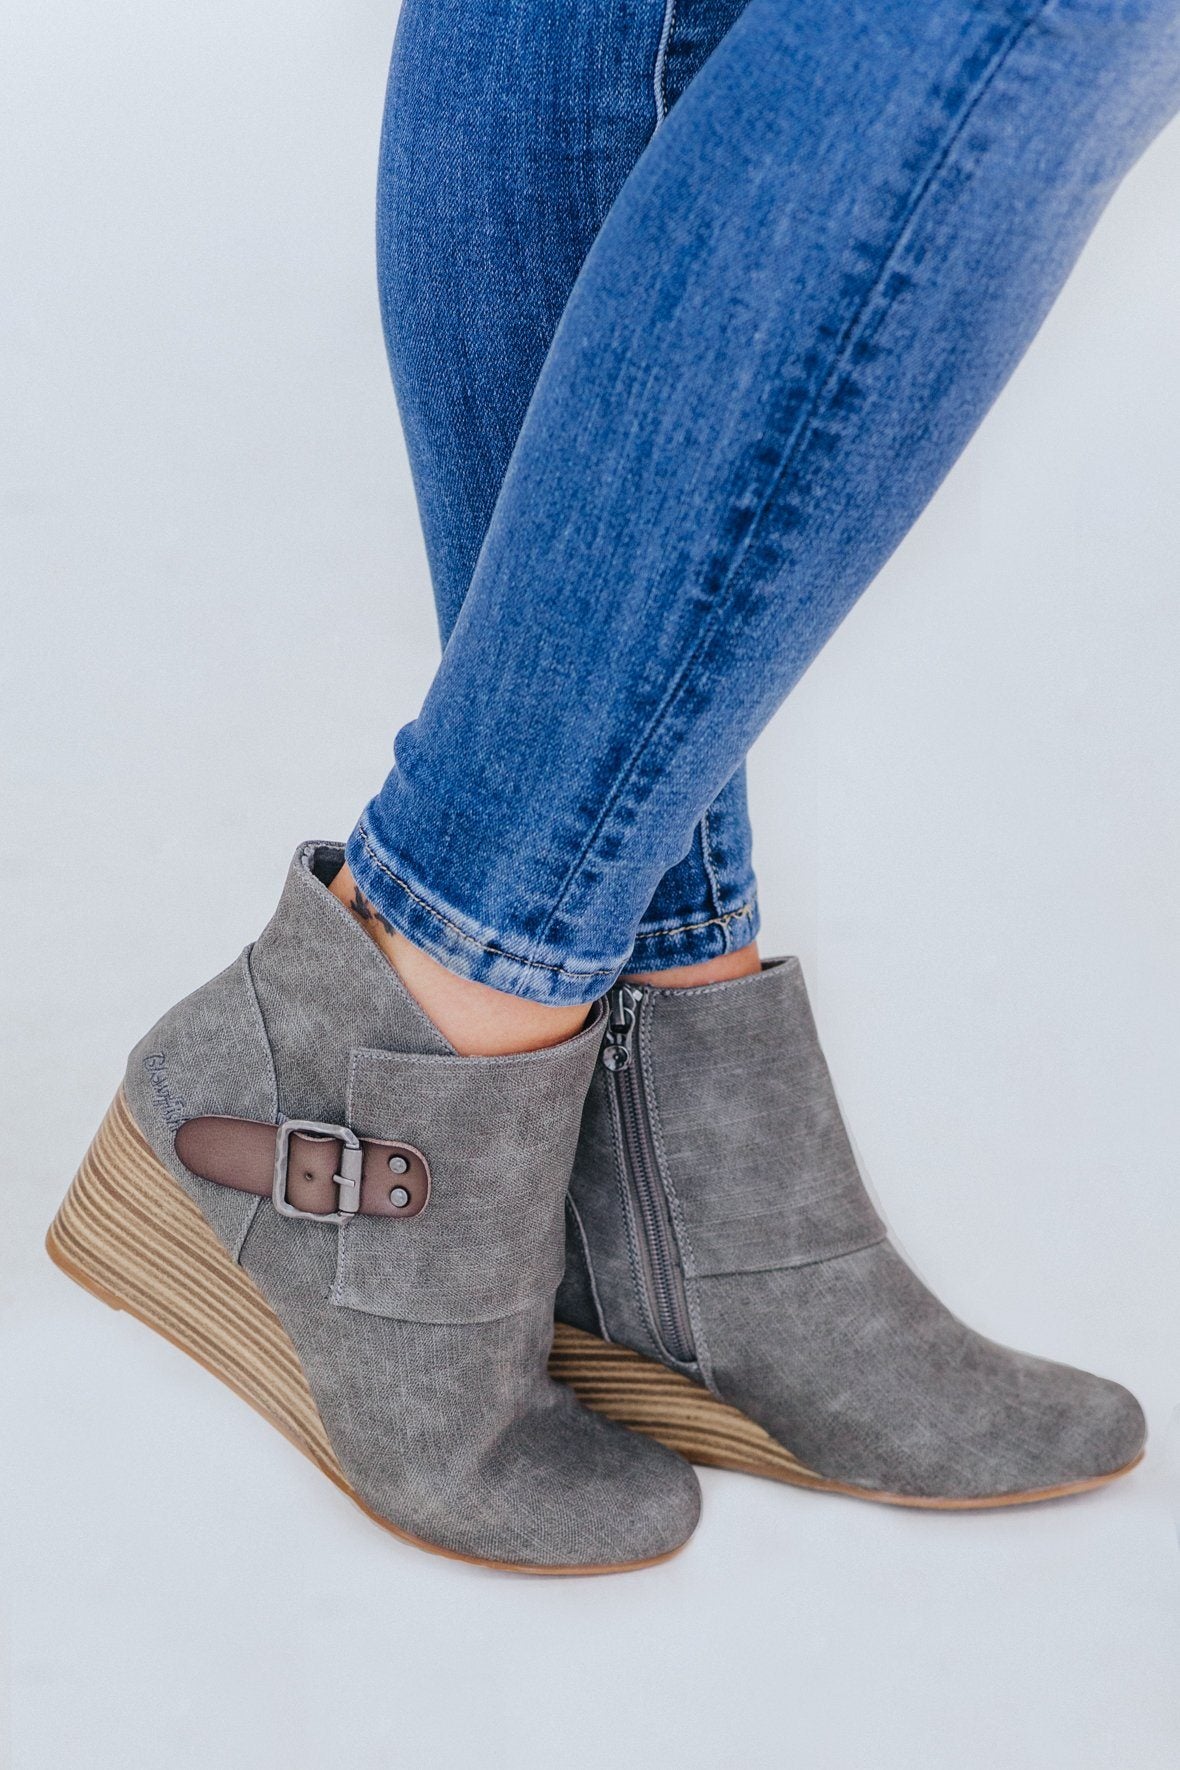 small wedge booties